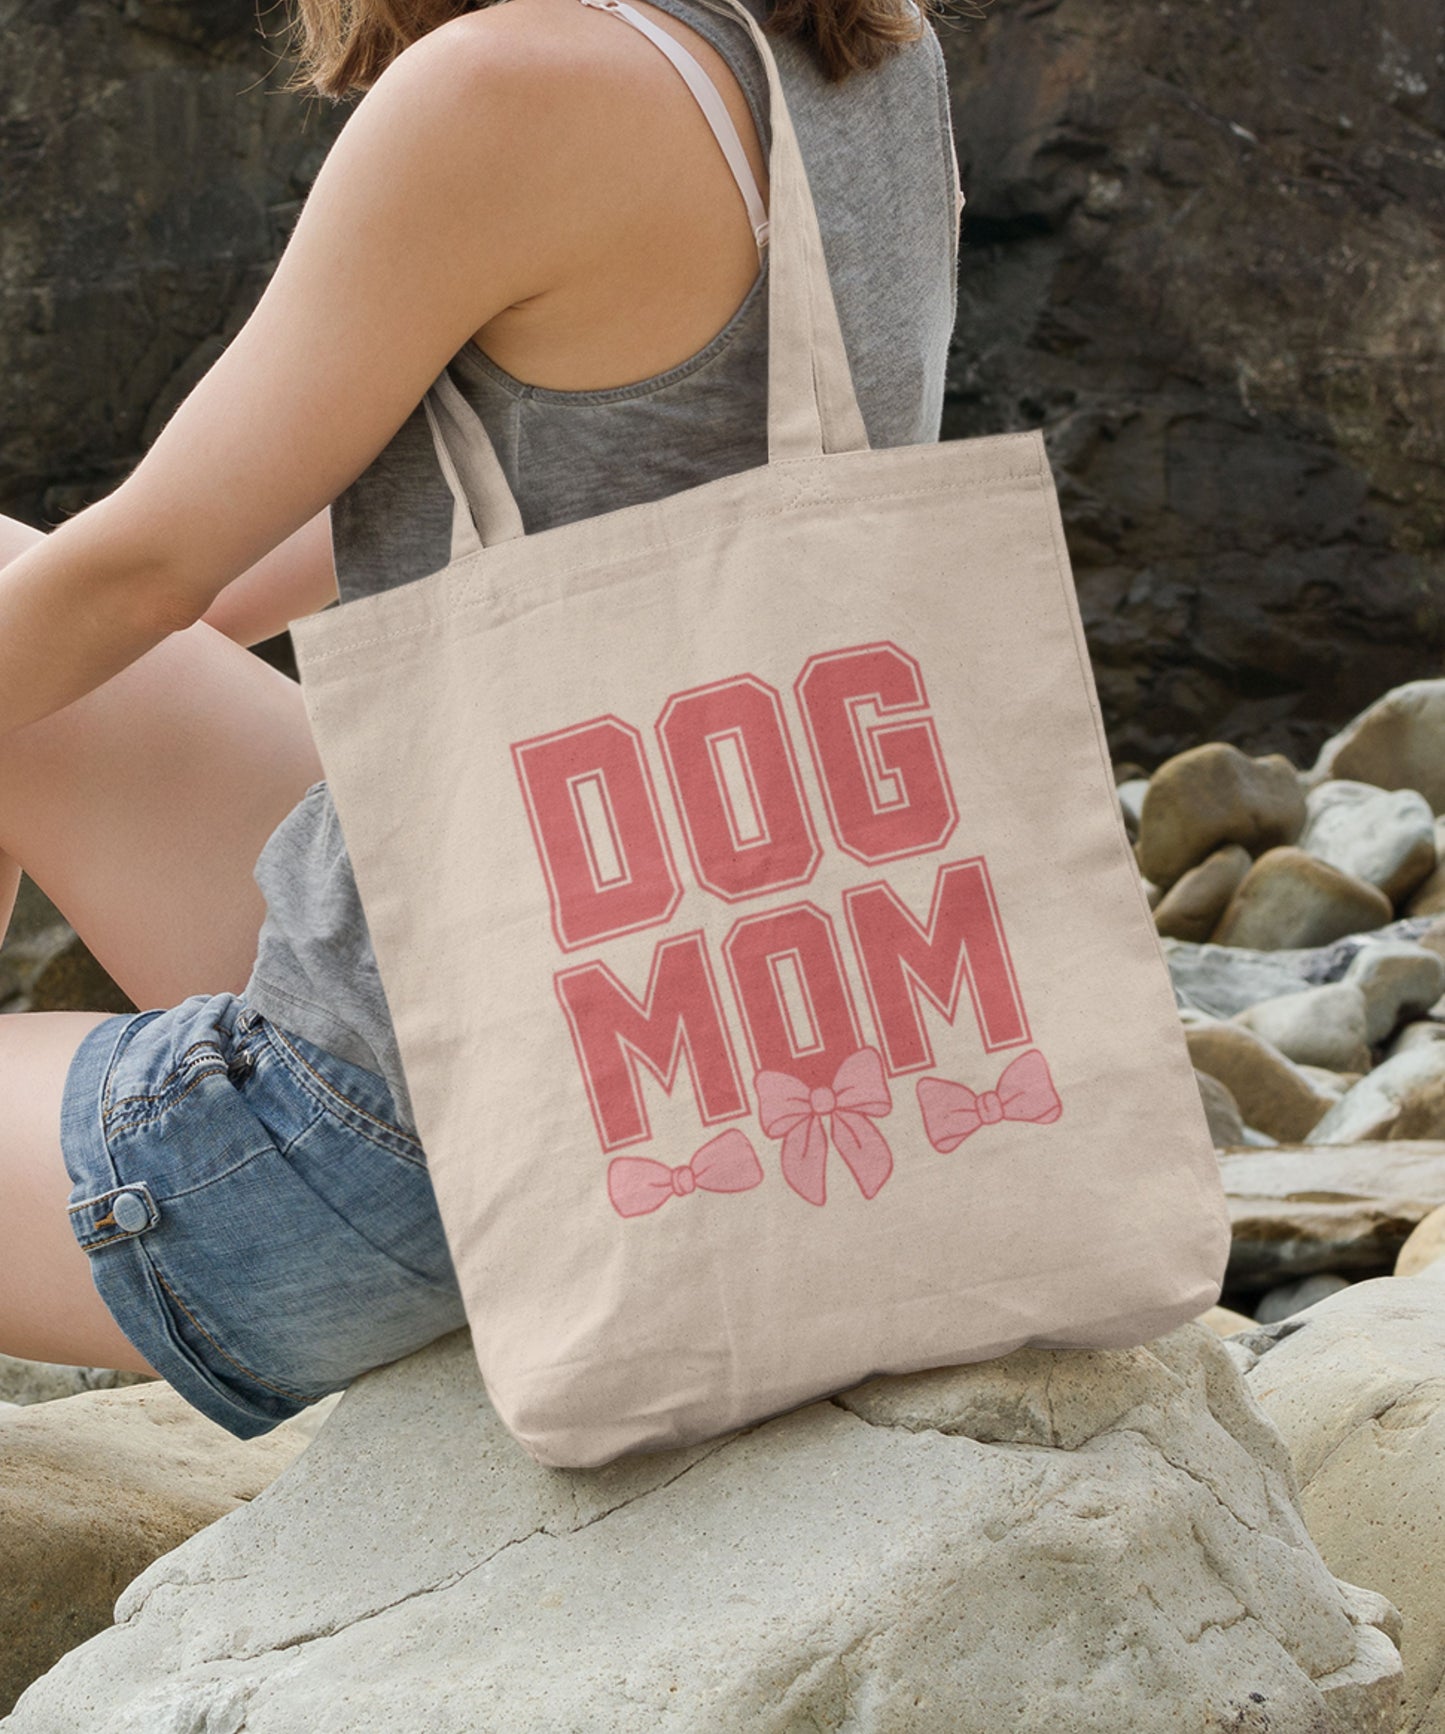 Coquette Pink Dog Mom Grocery Bag